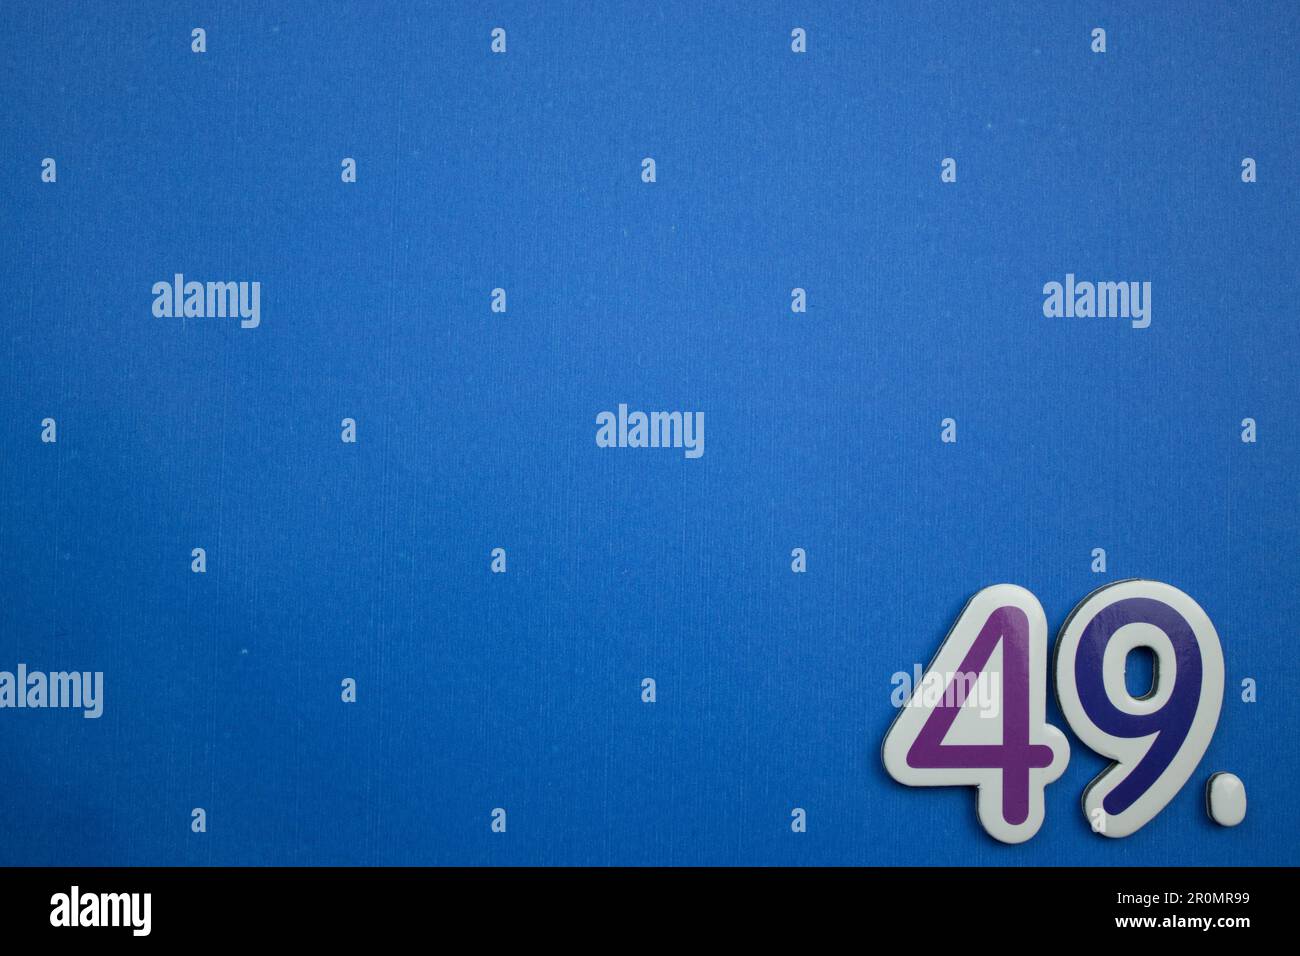 The number 49, placed on the edge of a blue background, photographed from above, colored purple and dark blue. Stock Photo